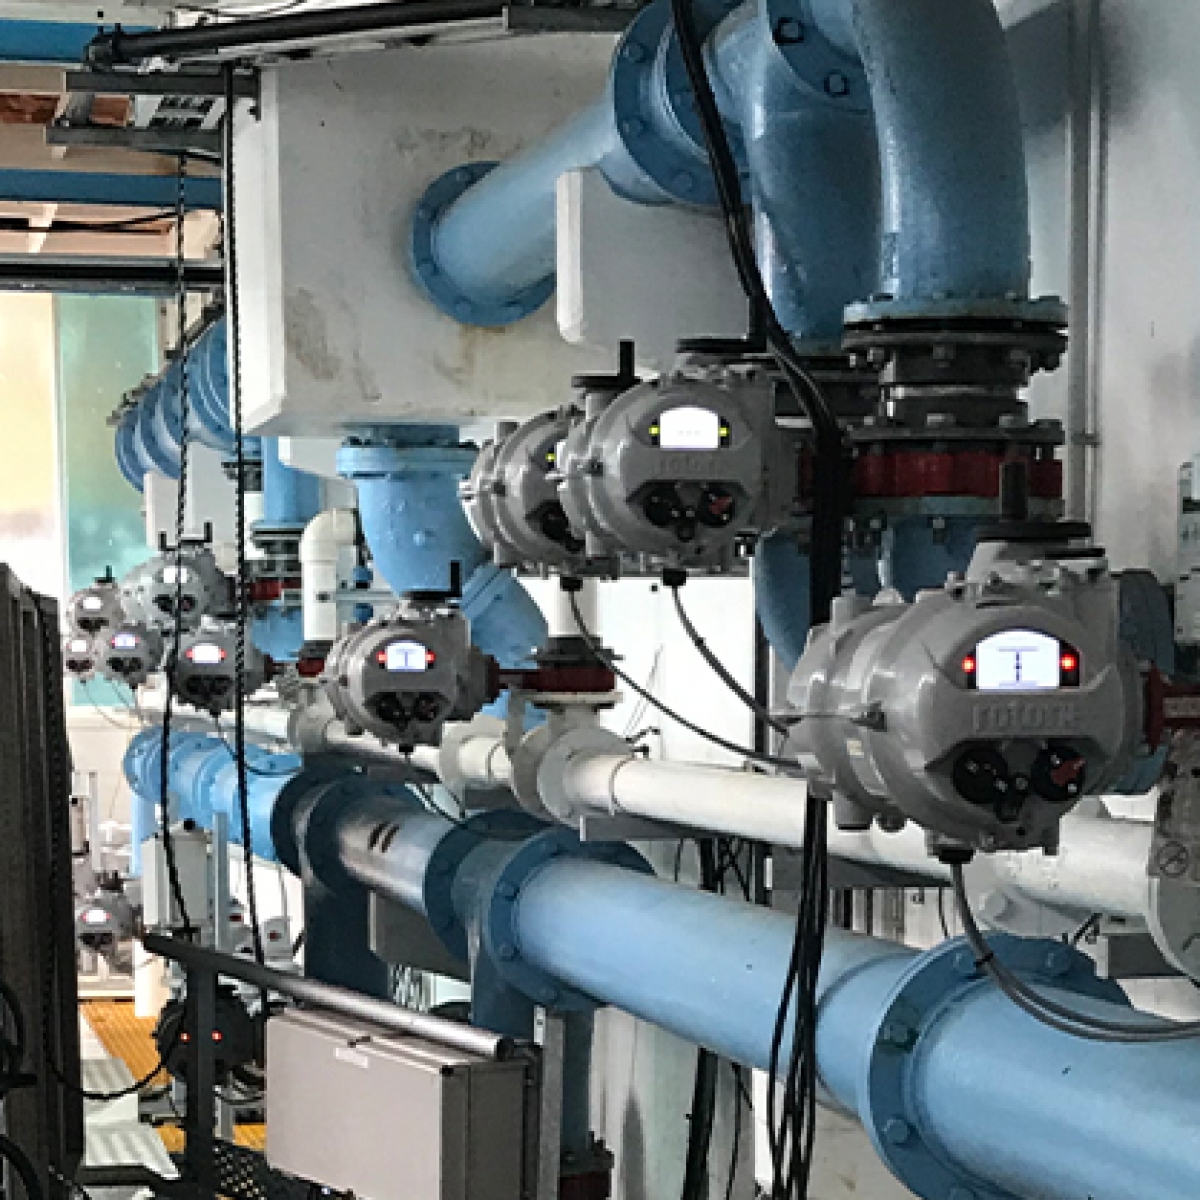 IQ actuators installed at Morrinsville water supply site.